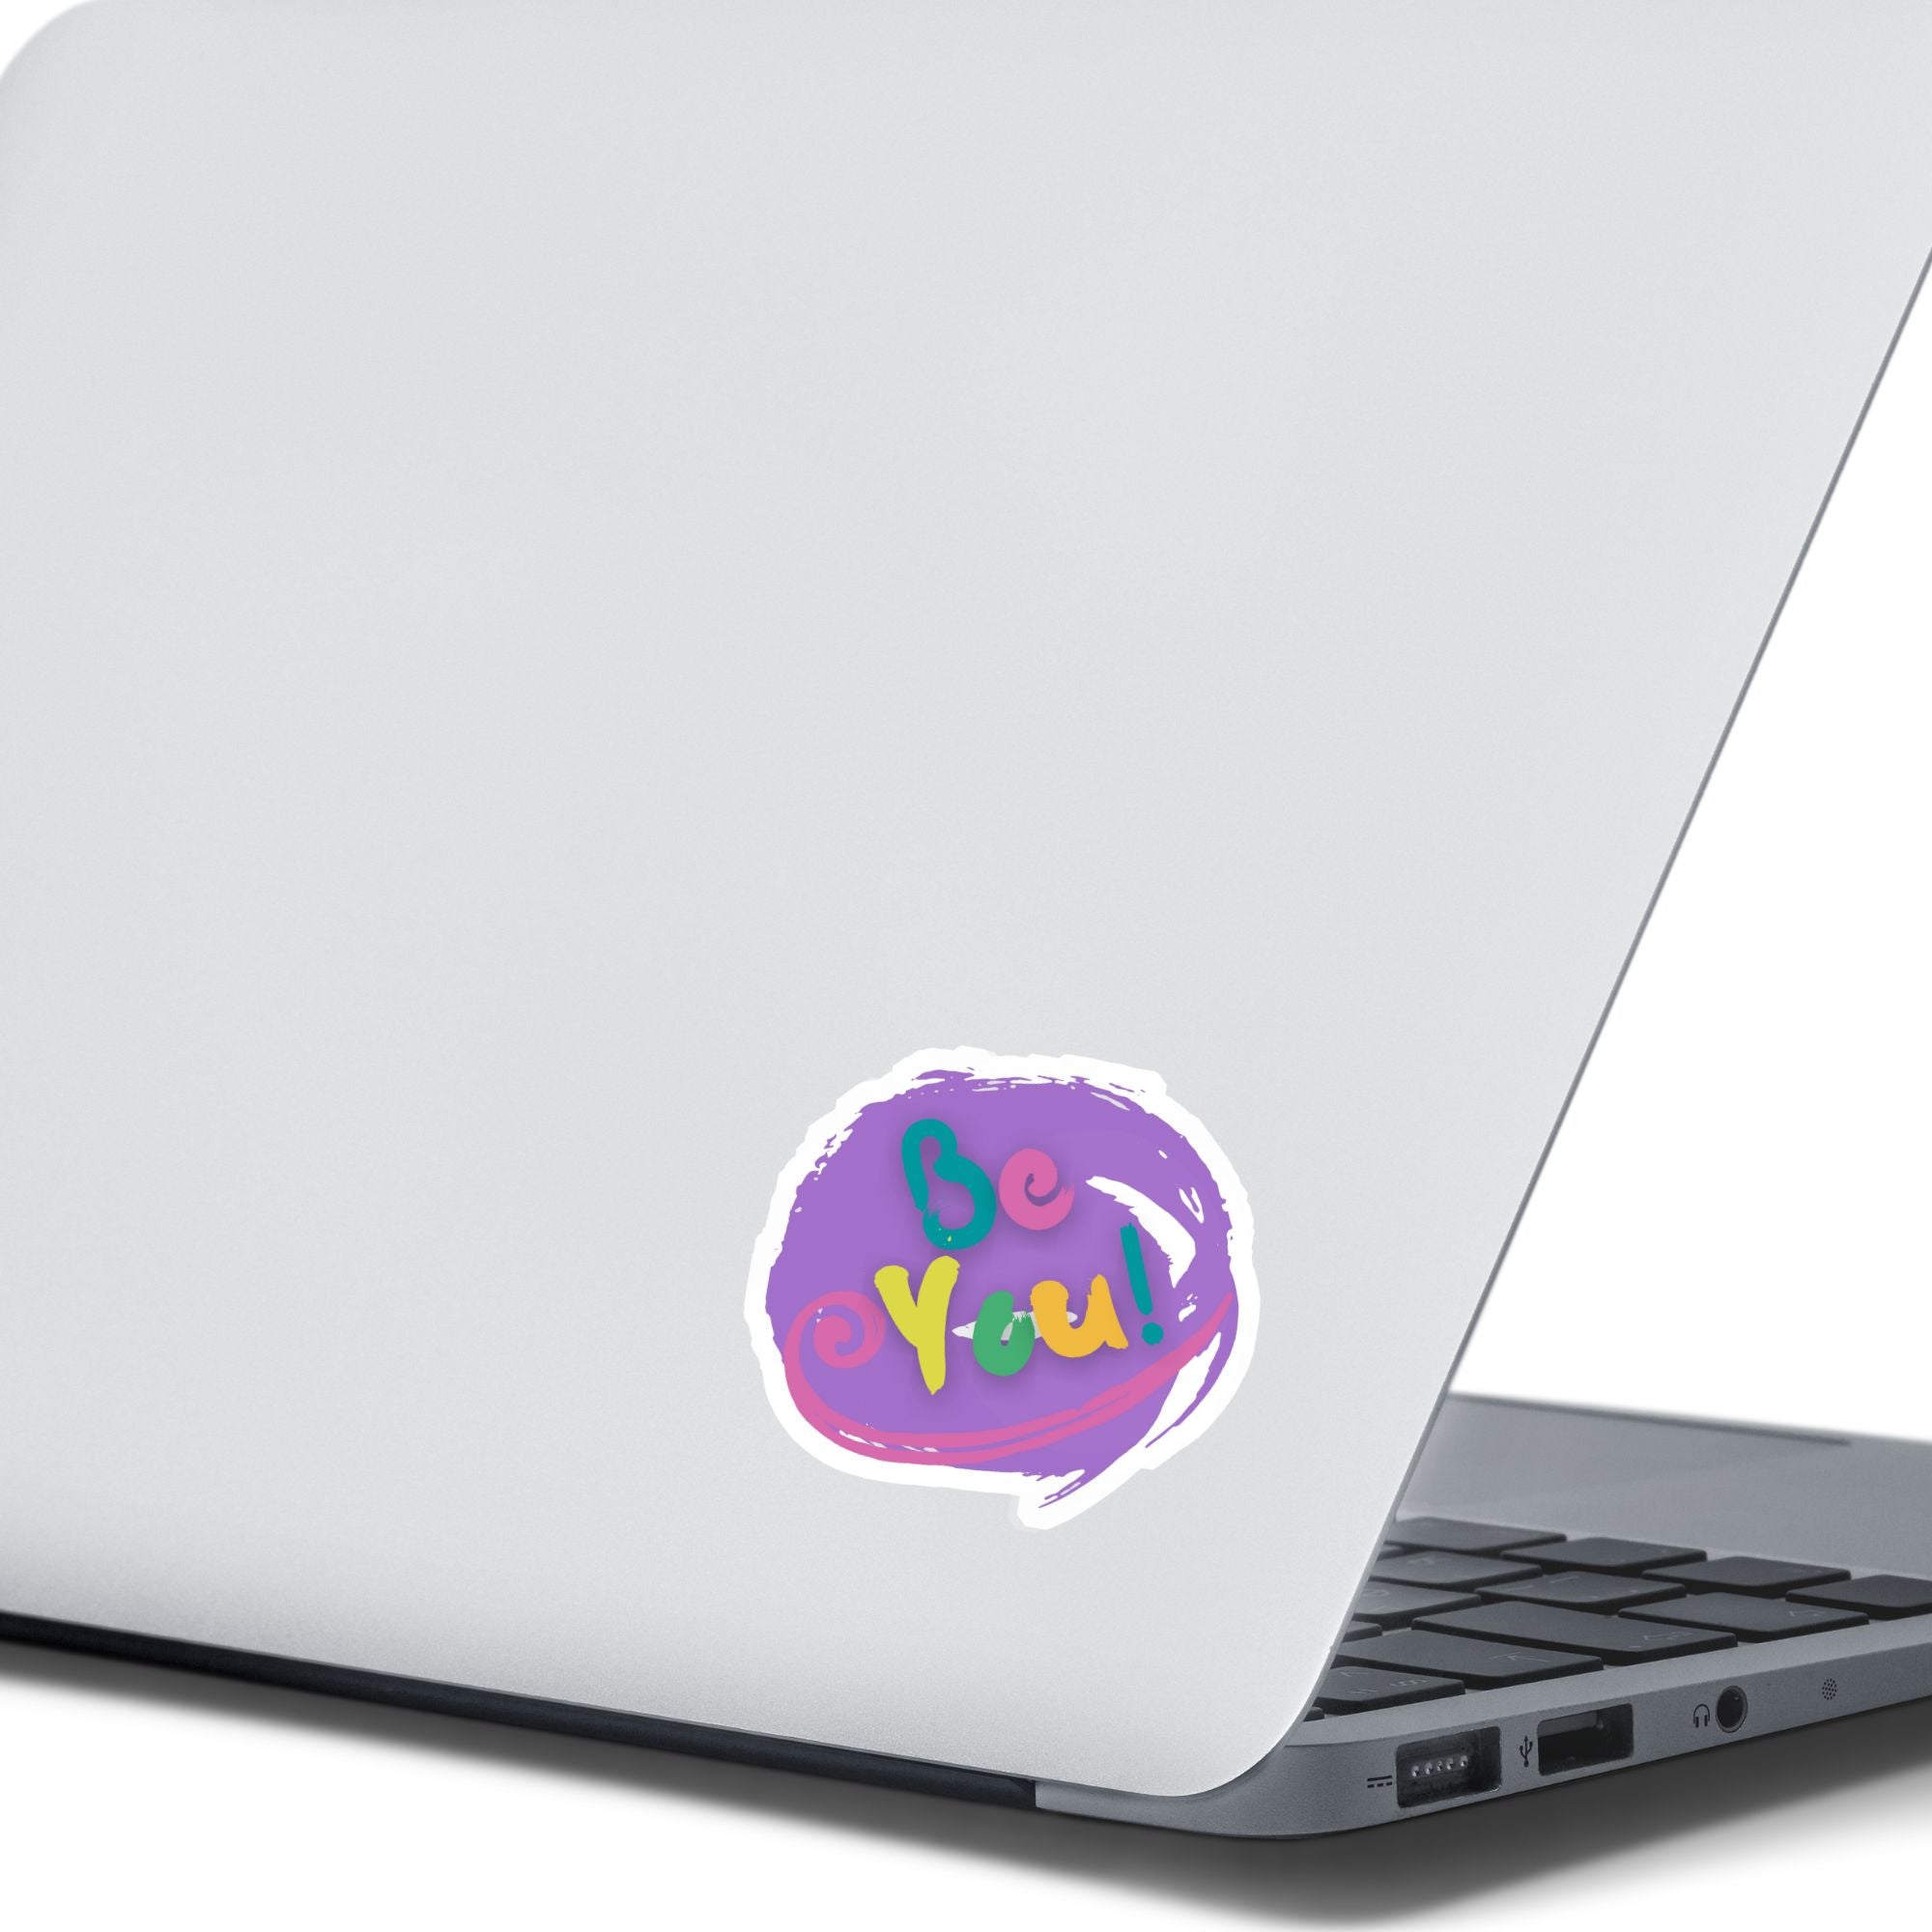 Be You - words to live by! This individual die-cut sticker features "Be You" in multiple pastel colors on a lavender background. This image shows the Be You! sticker on the back of an open laptop.